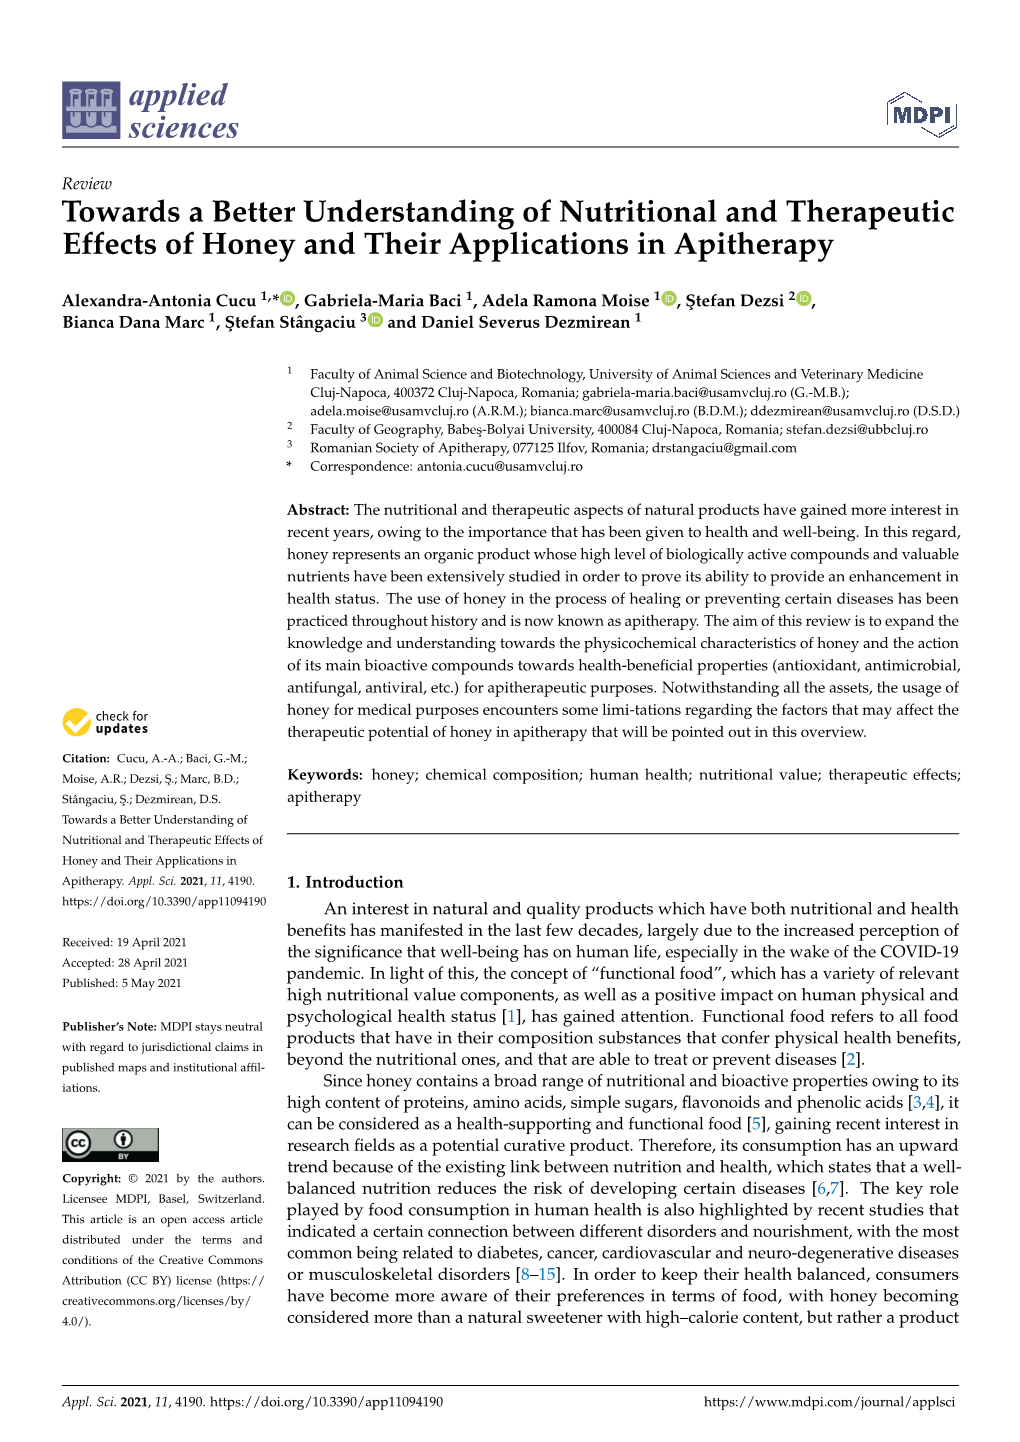 Towards a Better Understanding of Nutritional and Therapeutic Effects of Honey and Their Applications in Apitherapy